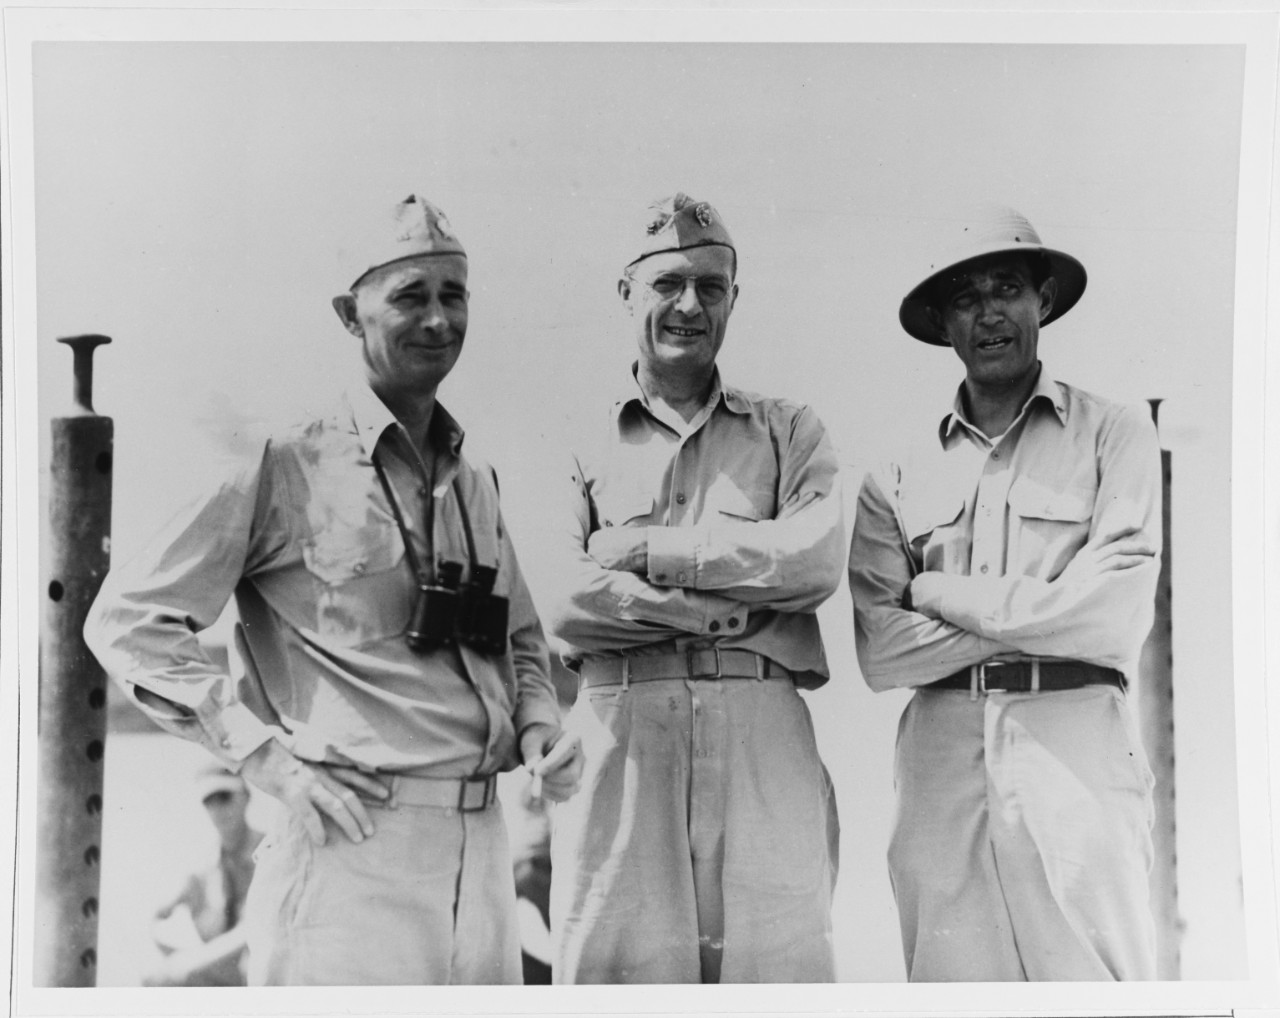 Captains C.H. Murphy, E.P. Forrestel and B.B. Biggs, after the landings at Naval Base "Piti" Apra Harbor, Guam, 31 July 1944